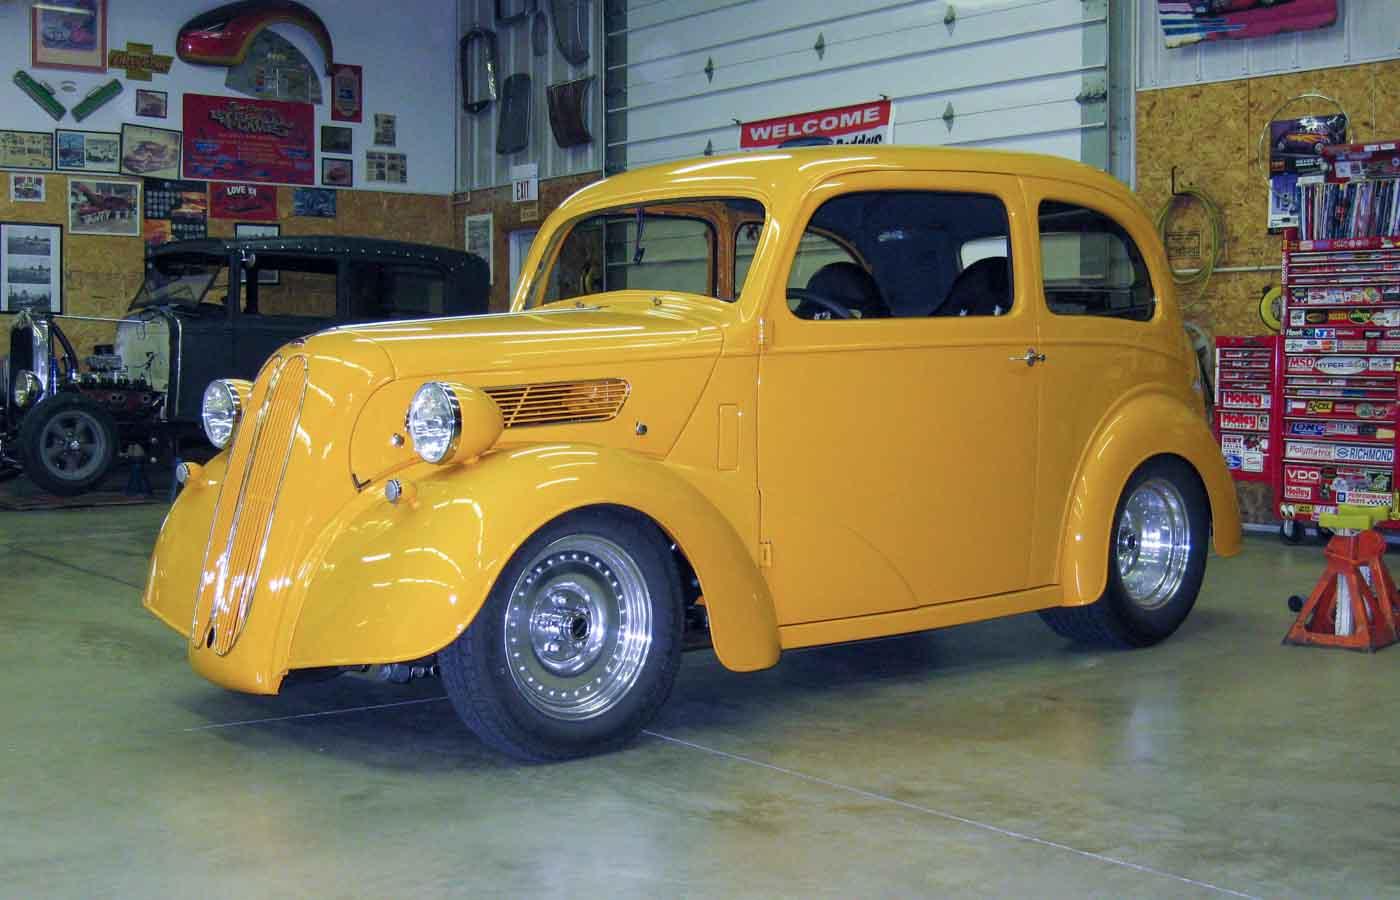 Yellow Anglia hot rod in the shop